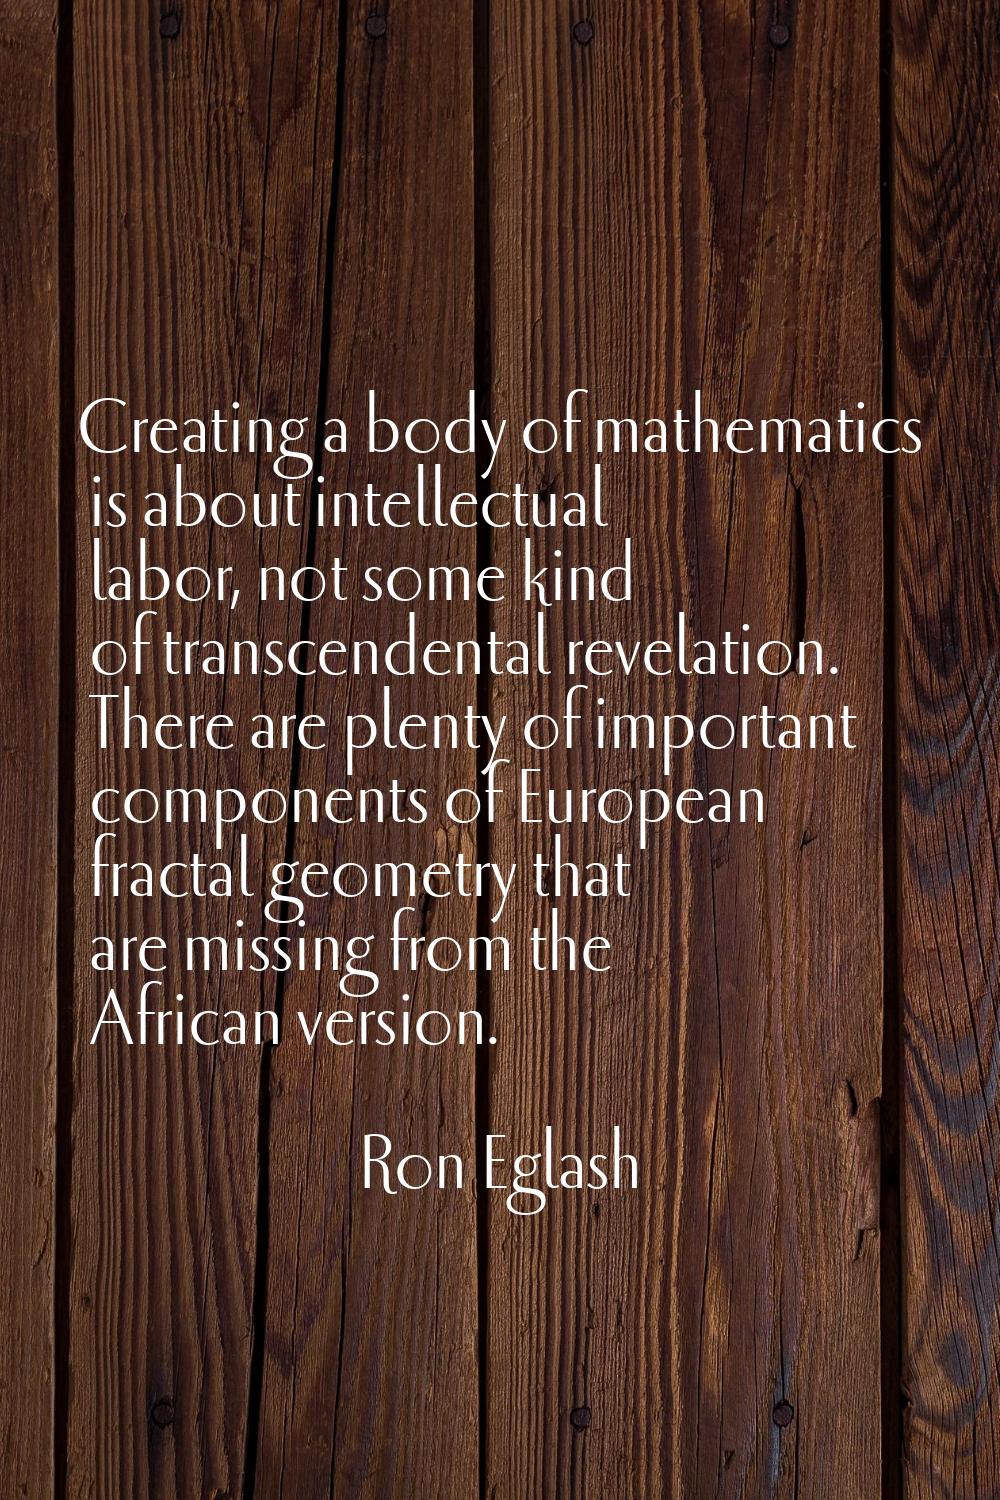 Creating a body of mathematics is about intellectual labor, not some kind of transcendental revelat